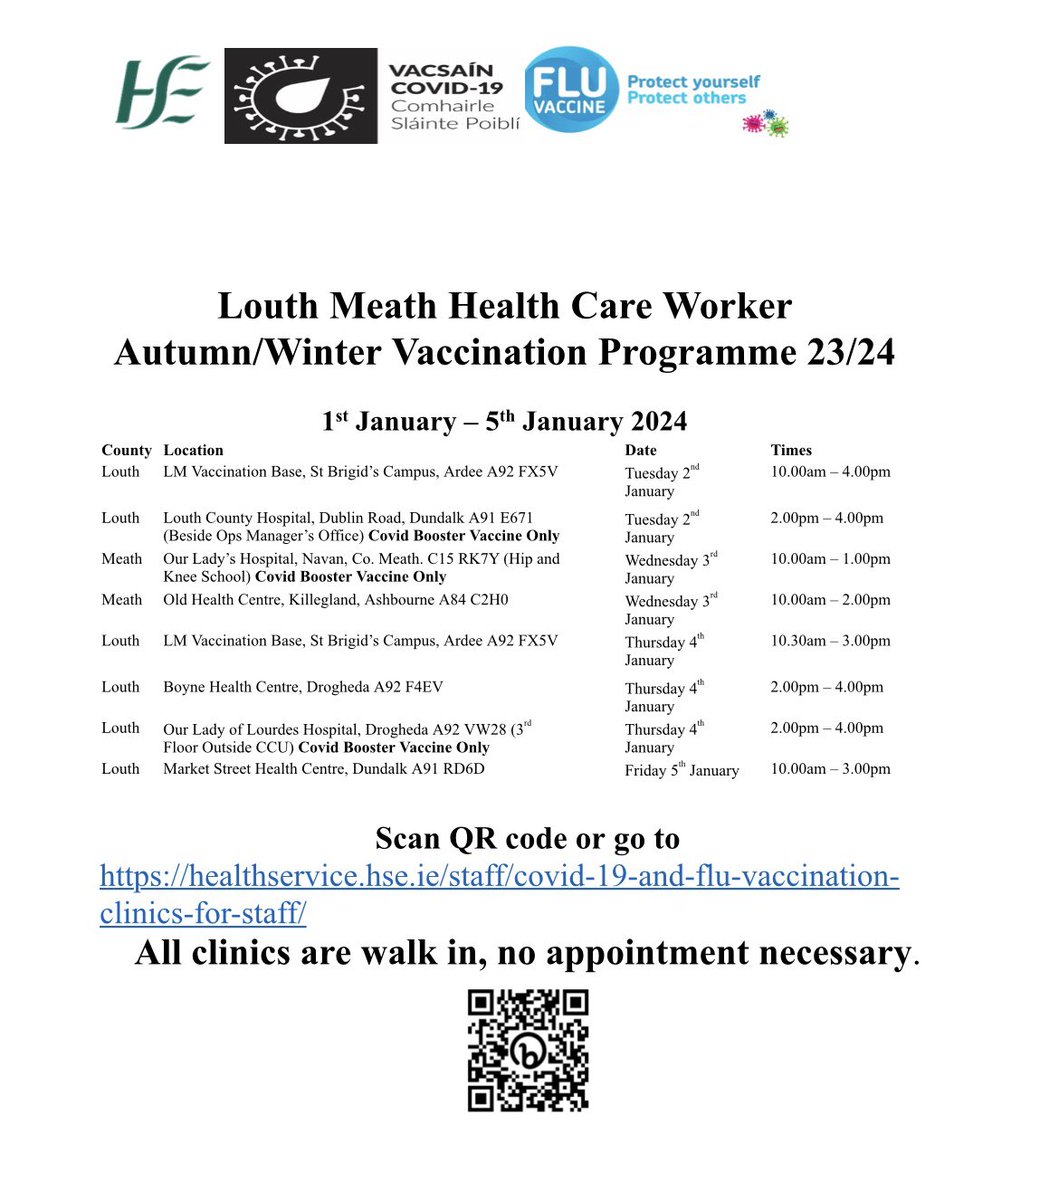 Please see below dates and times for Healthcare Worker Vaccination clinics in the Louth Meath area for the next two weeks. Both COVID and Flu vaccine available (unless otherwise indicated).